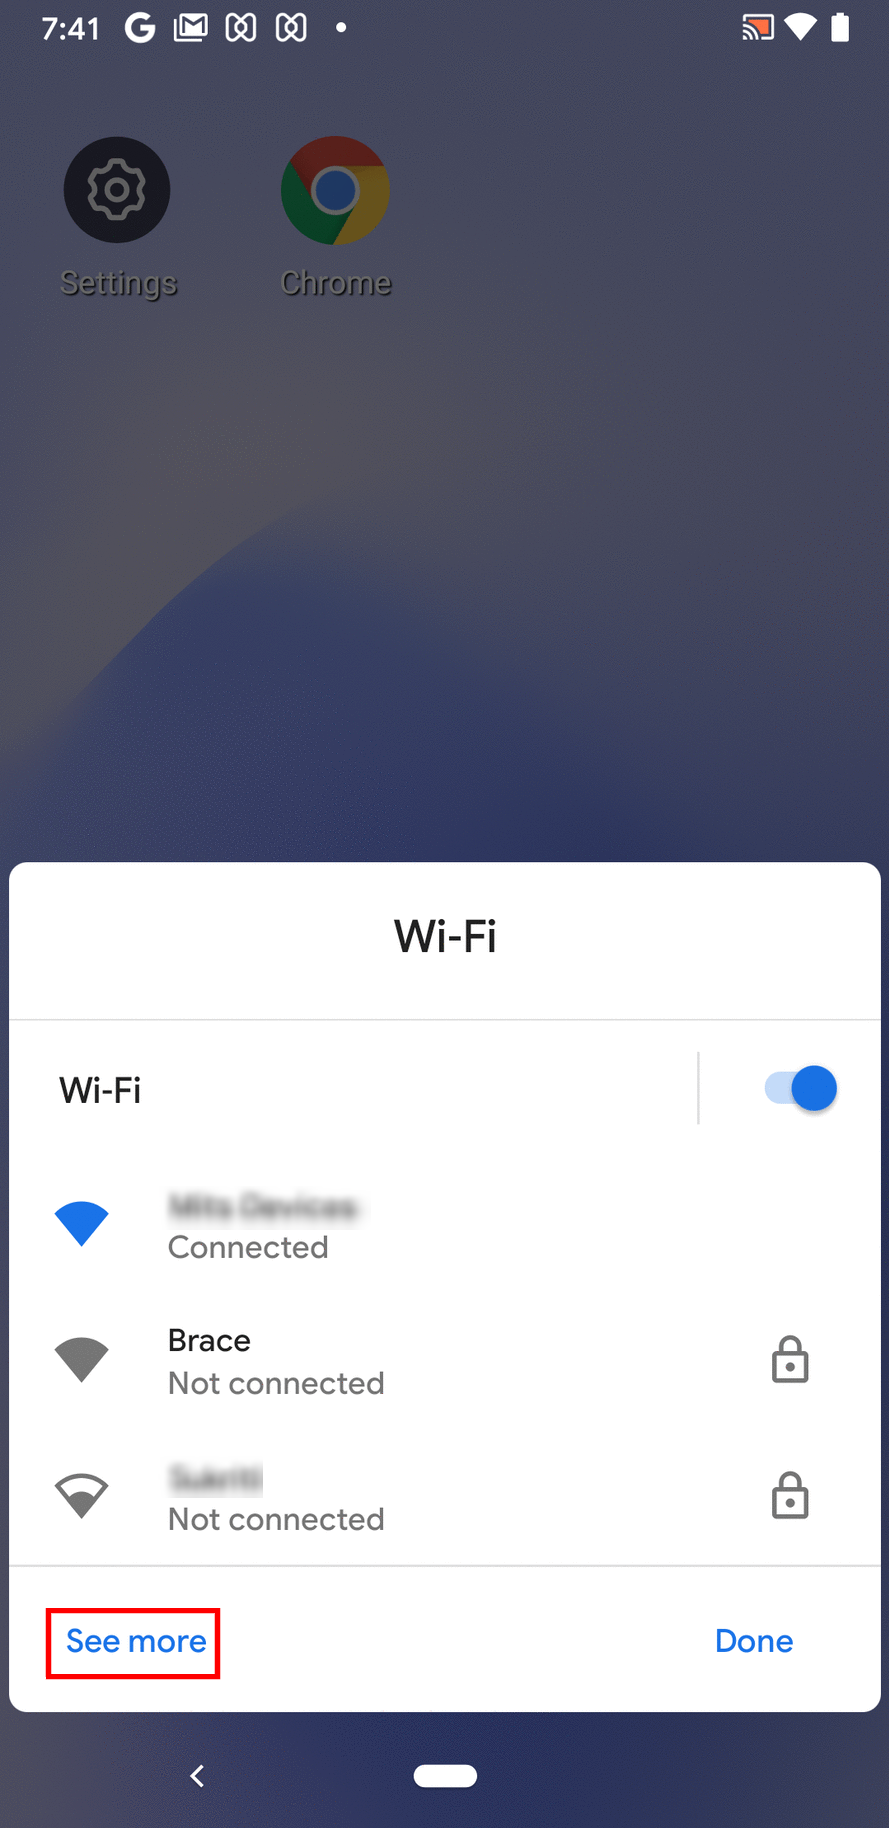 See More option in Wi-Fi panel